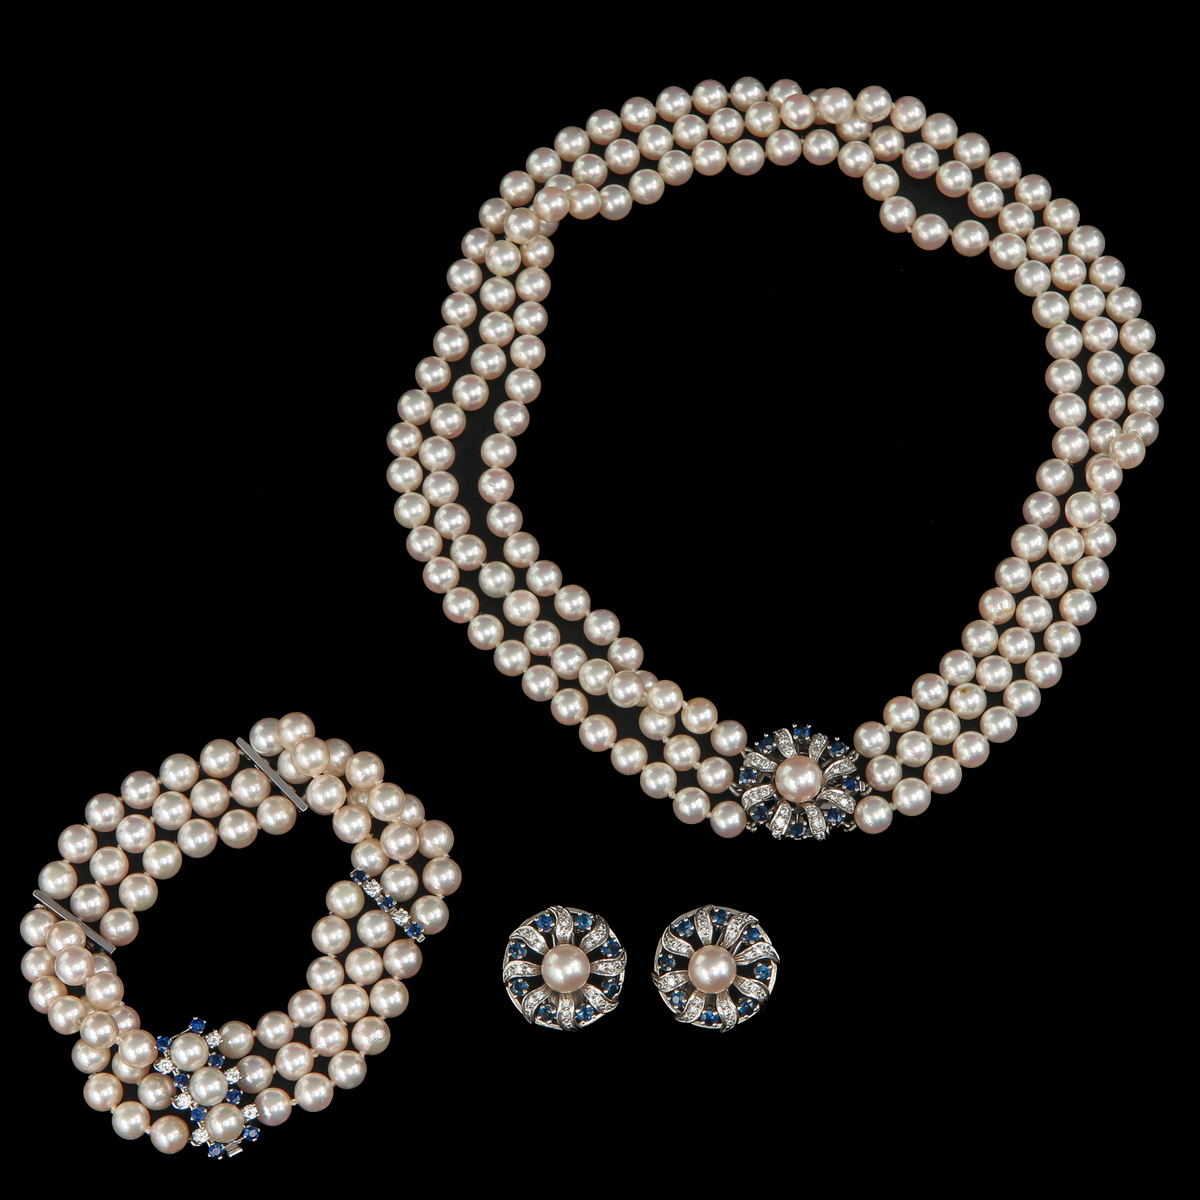 A Set of Pearl Jewelry